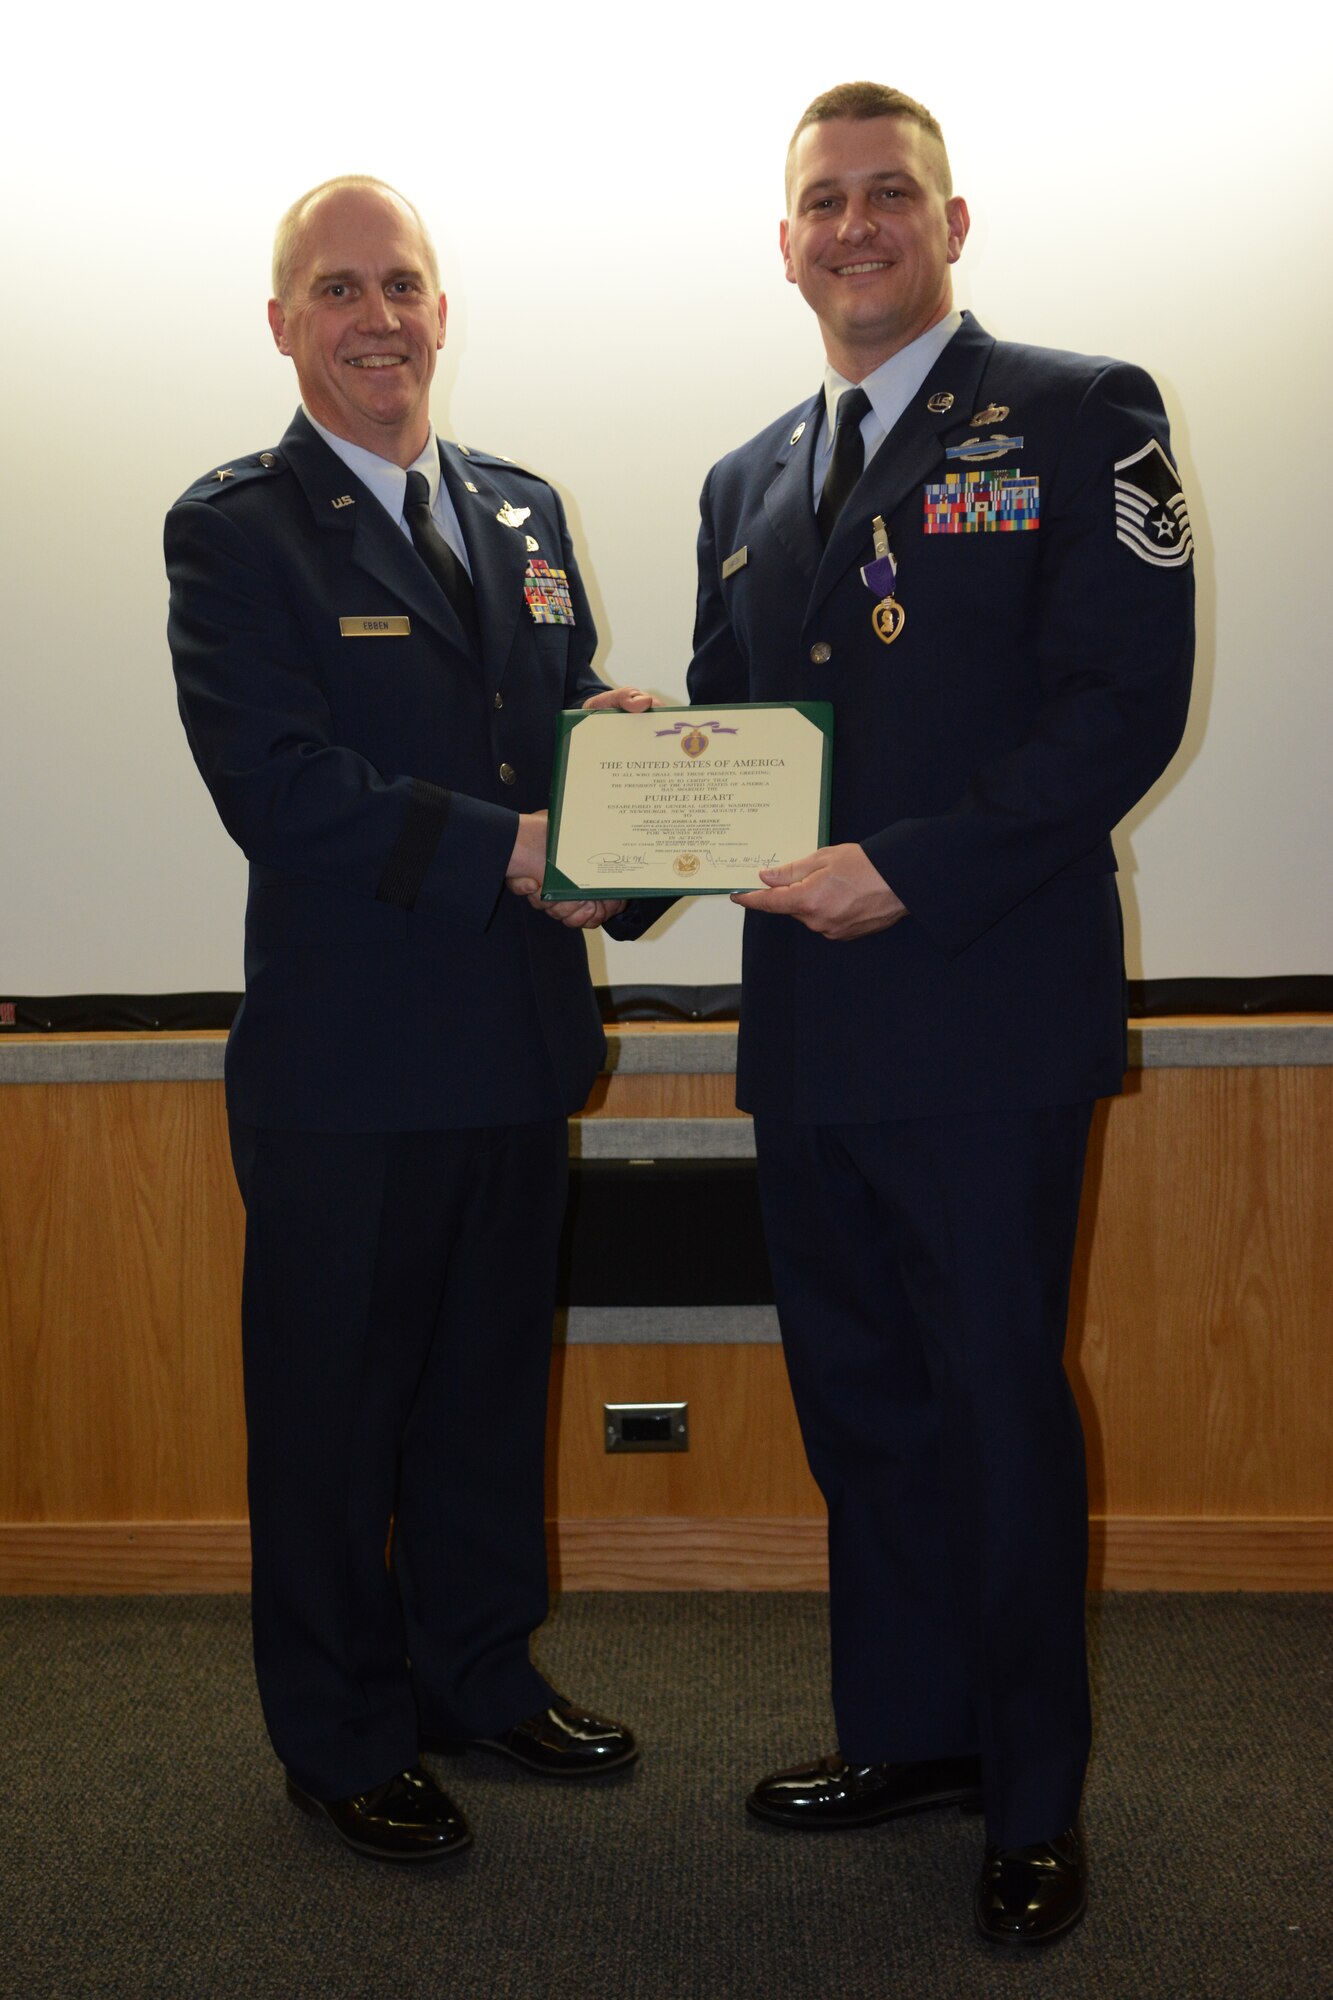 Brig. Gen. Gary L. Ebben, Wisconsin's assistant adjutant general for Air, and Master Sgt. Joshua Johnson, 115th Fighter Wing budget analyst, pose following Johnson’s Purple Heart ceremony at the 115 FW in Madison, Wis., May 3, 2014. Johnson was awarded the medal after being thrown from his gunner’s seat and injured during a 2005 deployment. (Air National Guard photo by Senior Airman Andrea F. Liechti)